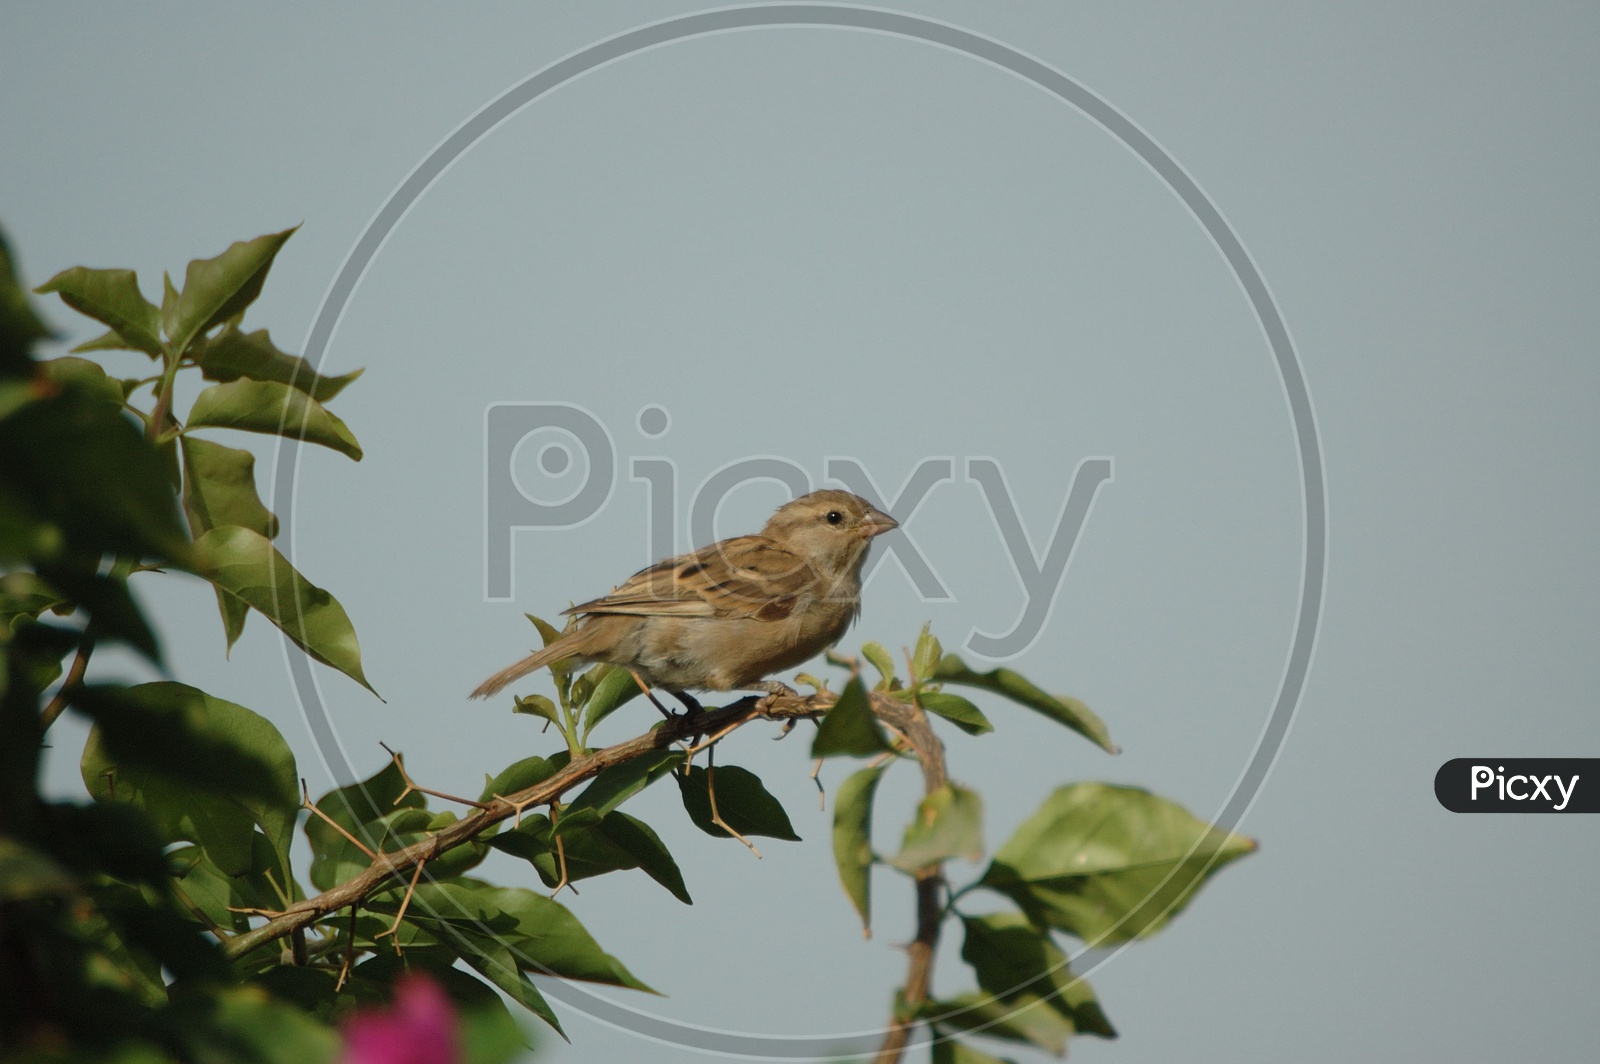 A Field sparrow along the tree branch